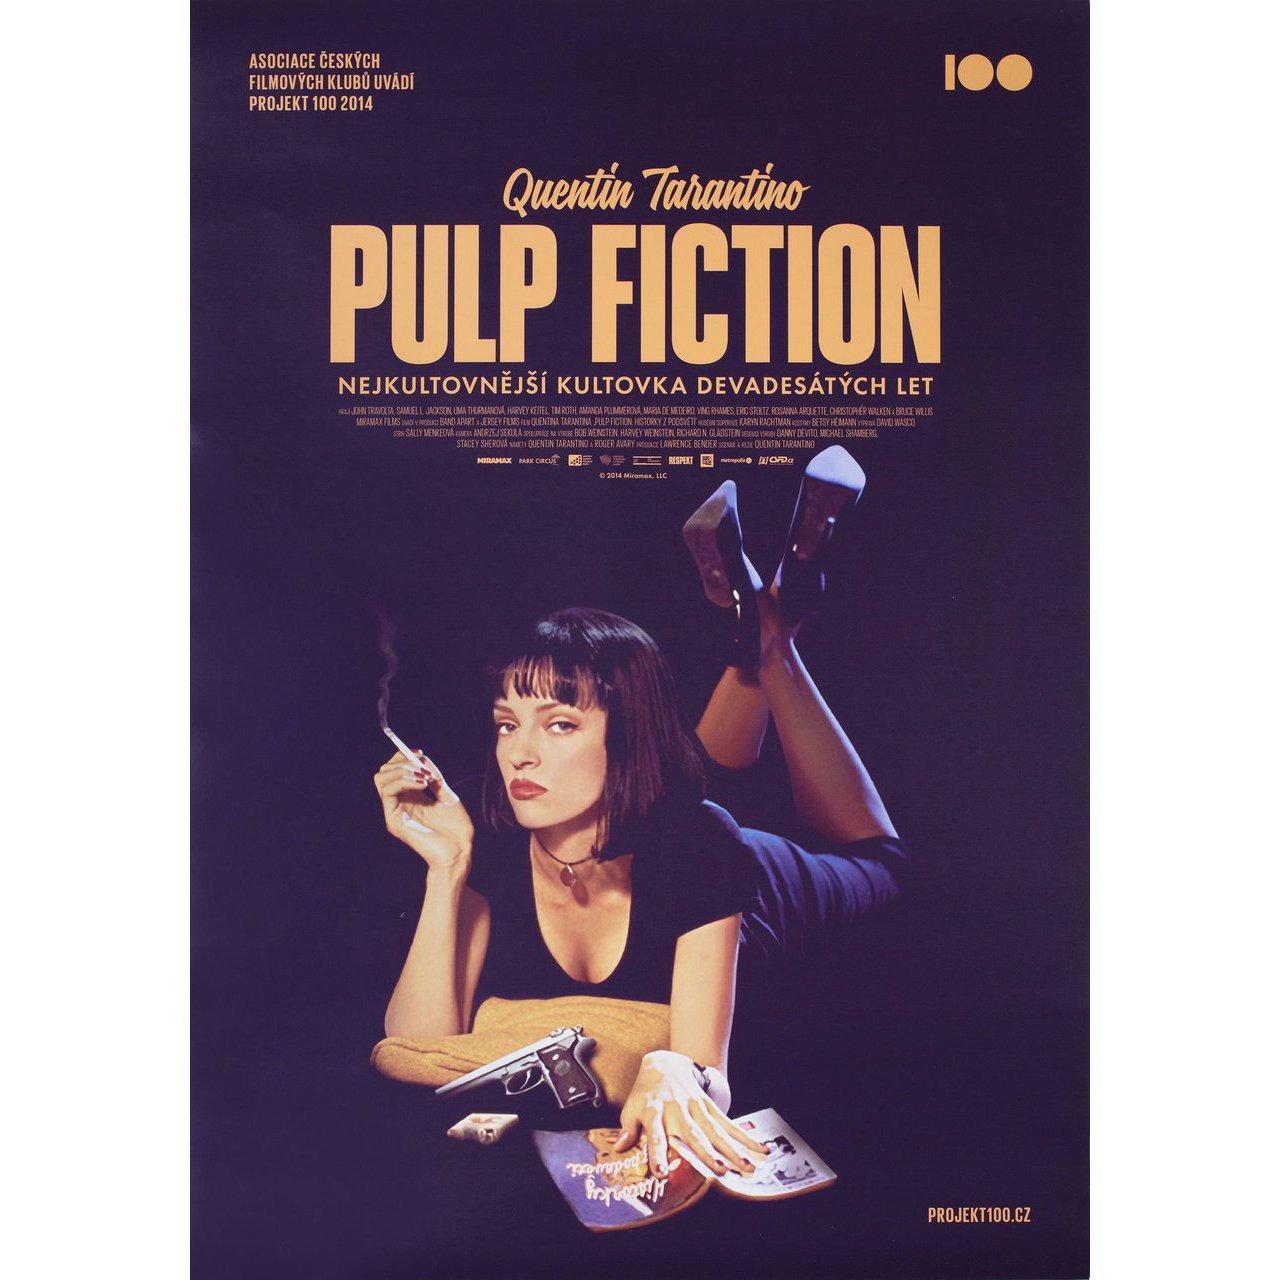 Original 2014 re-release Czech A1 poster for the 1994 film ‘Pulp Fiction’ directed by Quentin Tarantino with Tim Roth / Amanda Plummer / Laura Lovelace / John Travolta. Very good-fine condition, rolled. Please note: the size is stated in inches and